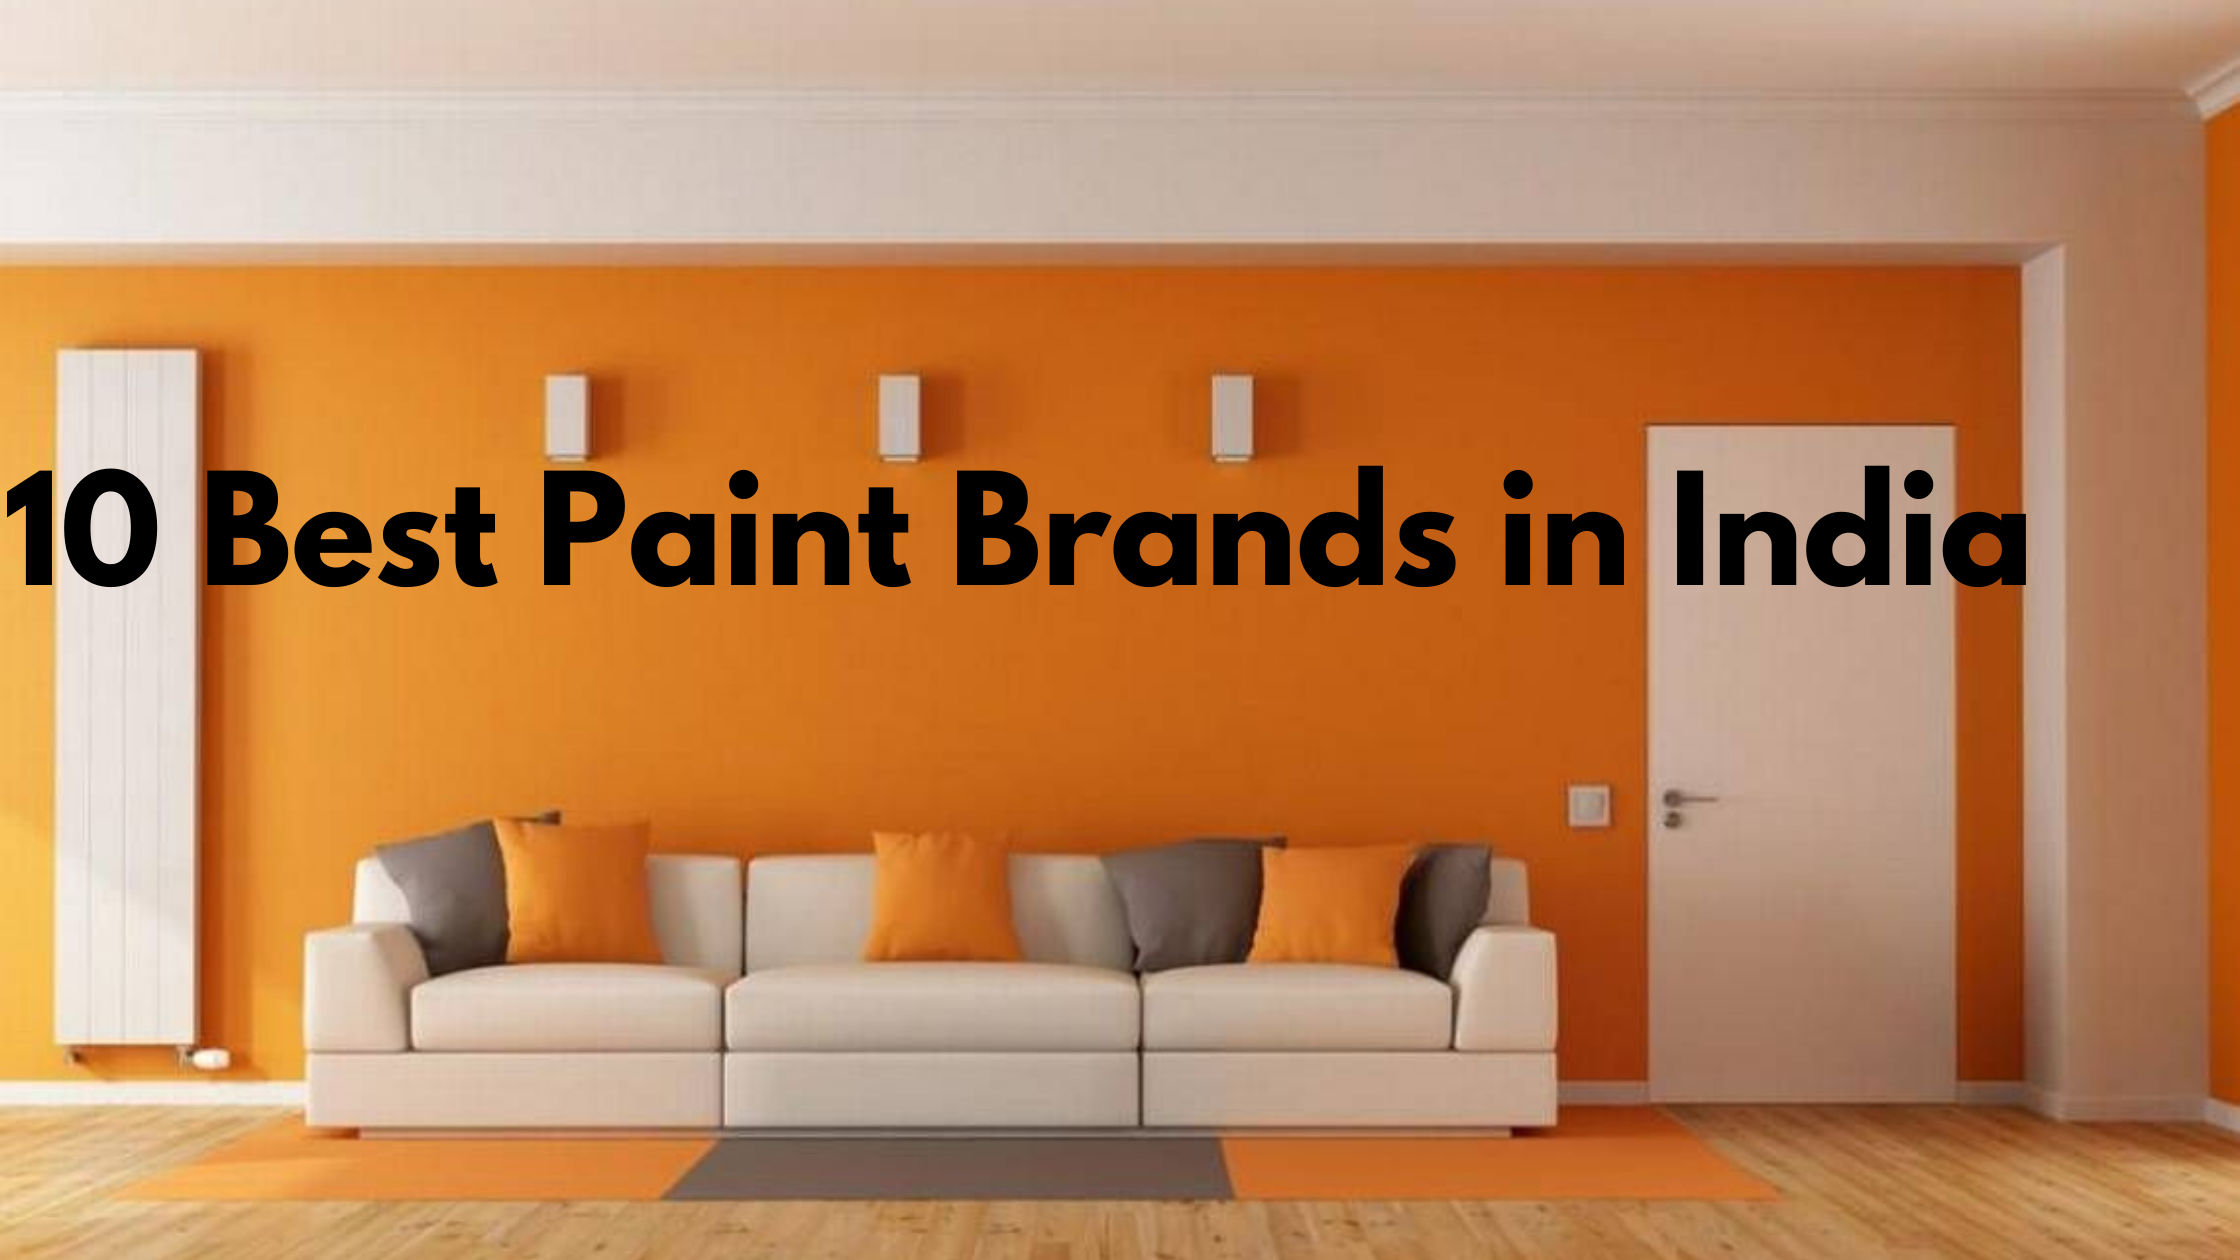 10 Best Paint Brands in India - Choose Best Paints for Your House